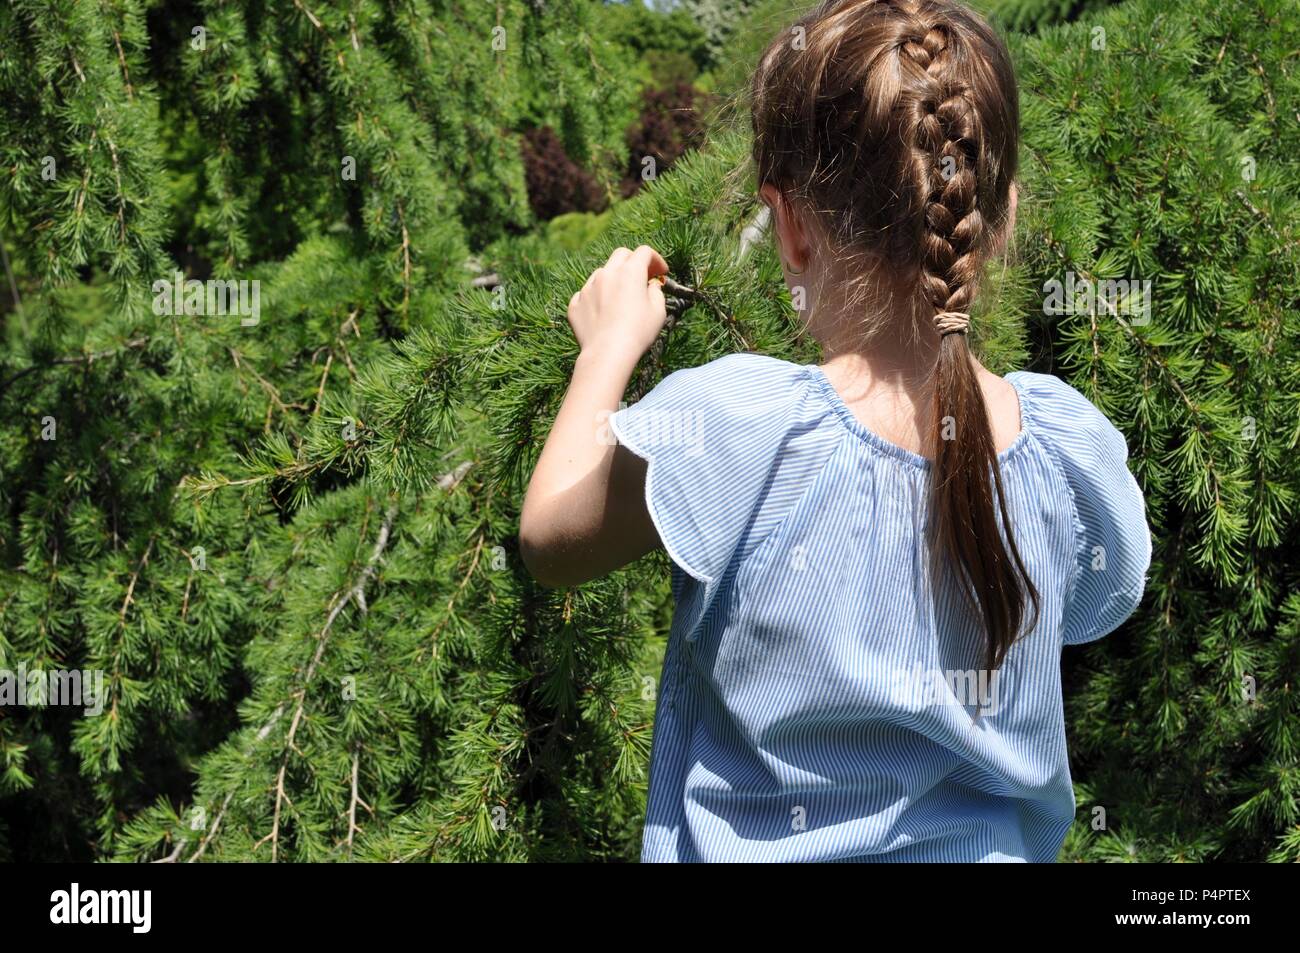 Beautiful white blonde girl, 7-9, tangled hair, 8 years old, touching pine branches in park, back portrait, close up, selective focus, copy space Stock Photo